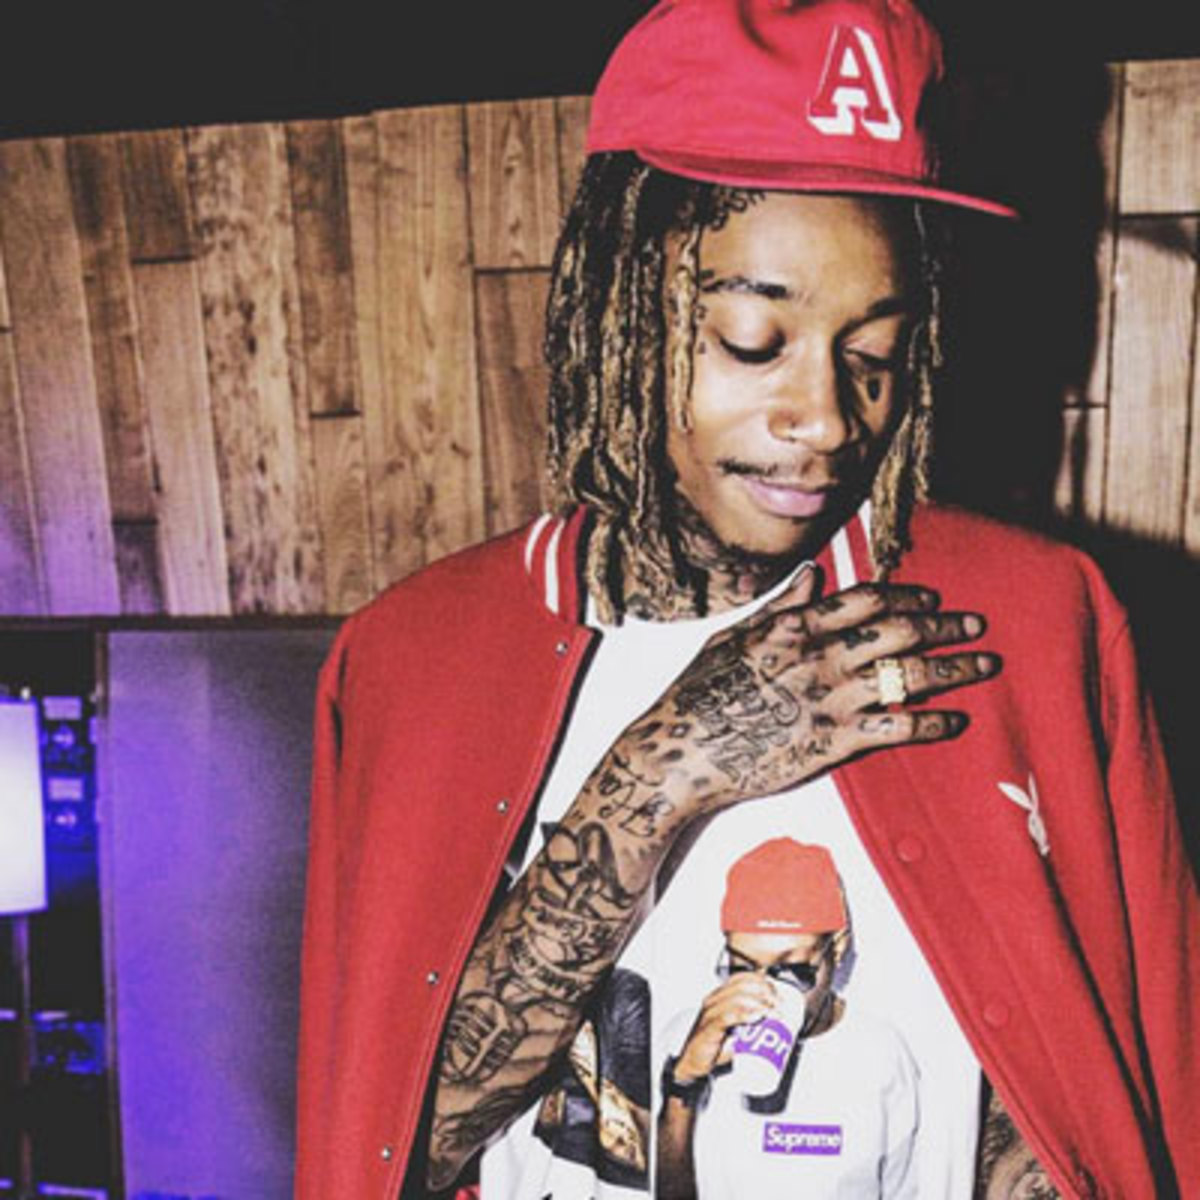 Wiz Khalifa’s “See You Again” First Hip-Hop Video With One Billion Views - DJBooth